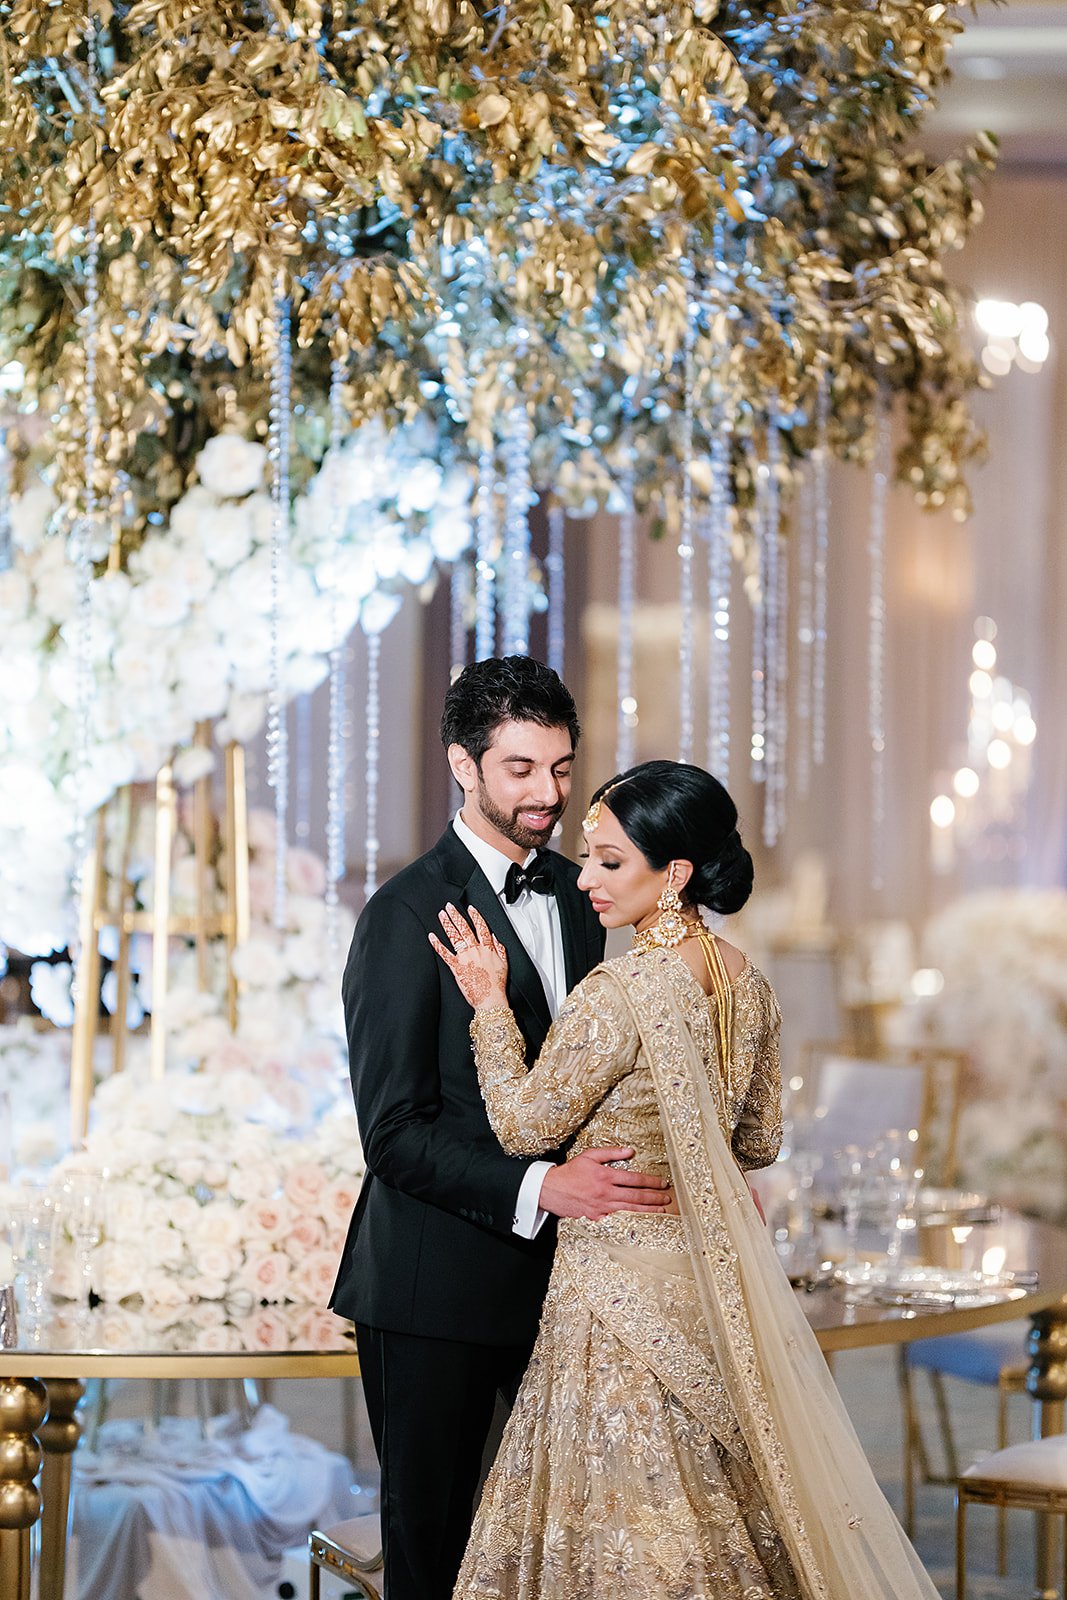 Indian bride and groom in luxe wedding reception